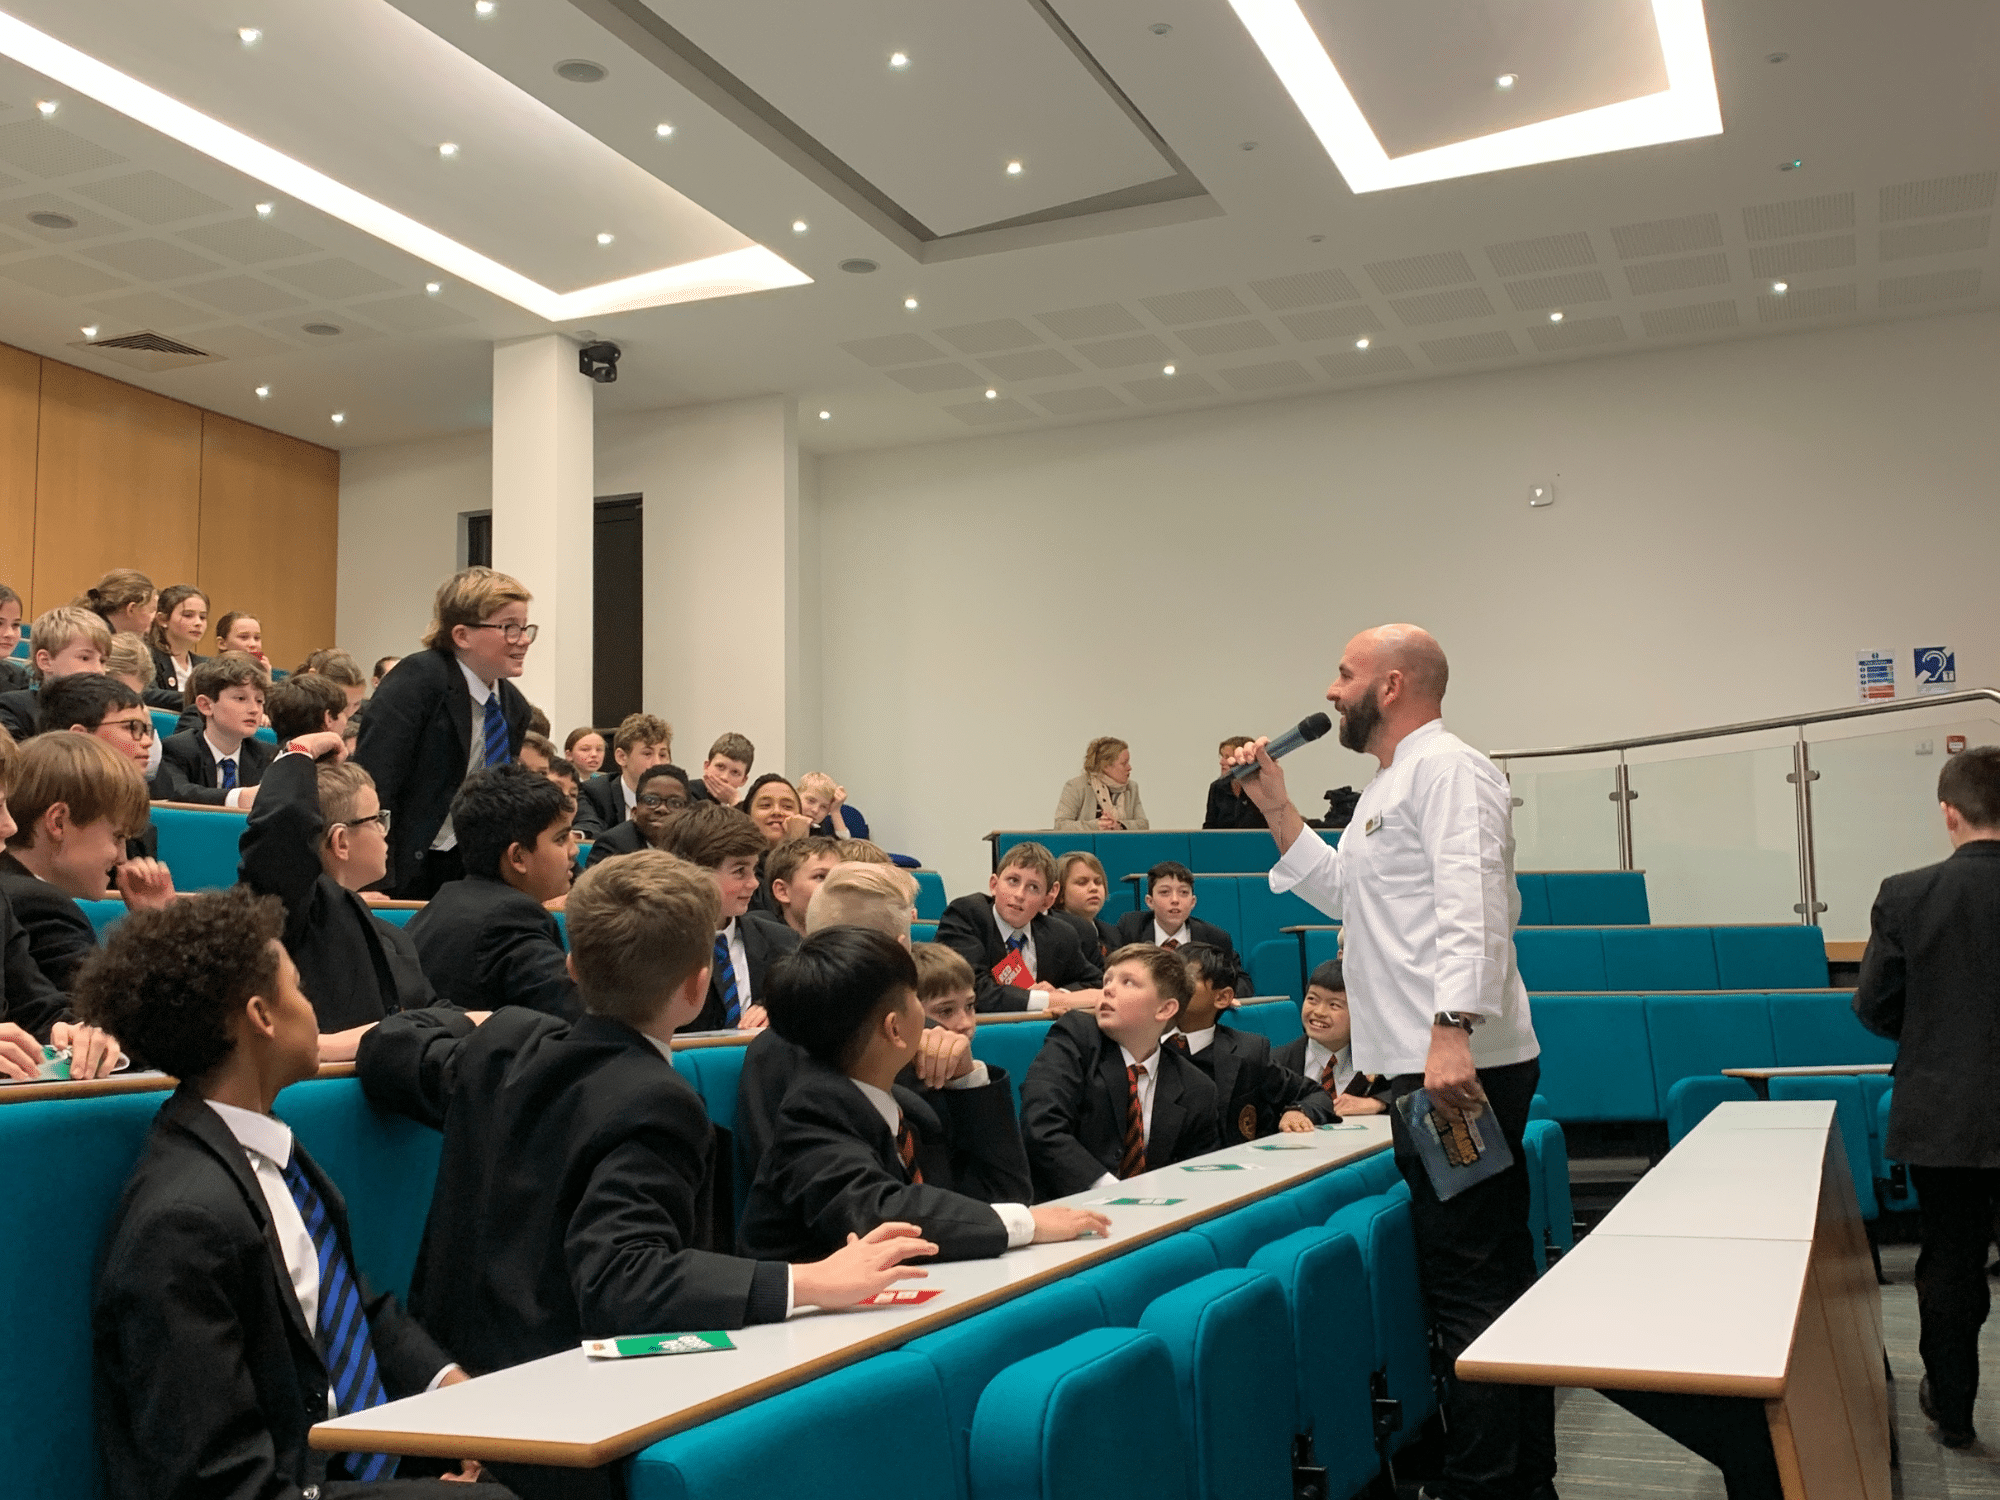 Pupils in lecture theatre